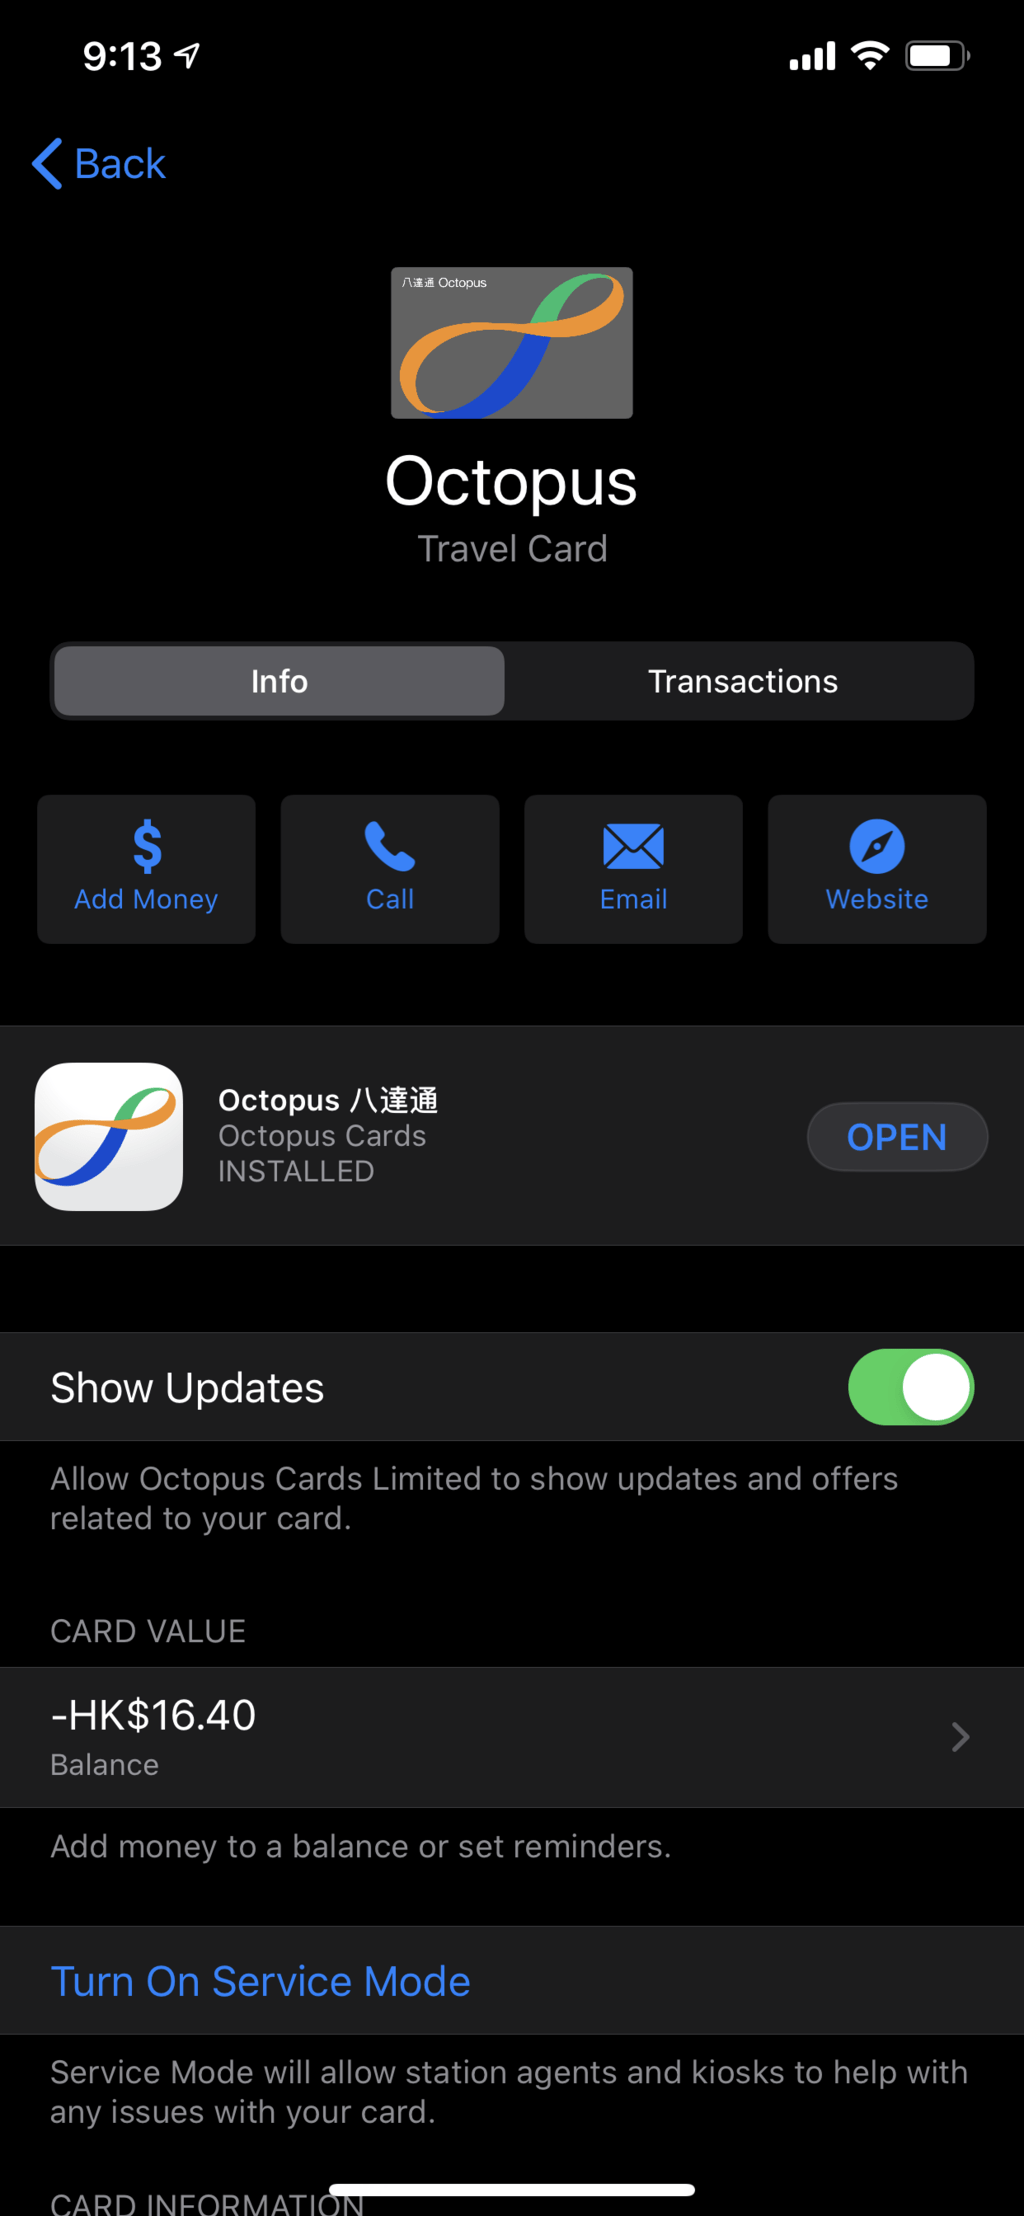 Viewing your Octopus card details in Apple Wallet. / Image courtesy of Brent Deverman